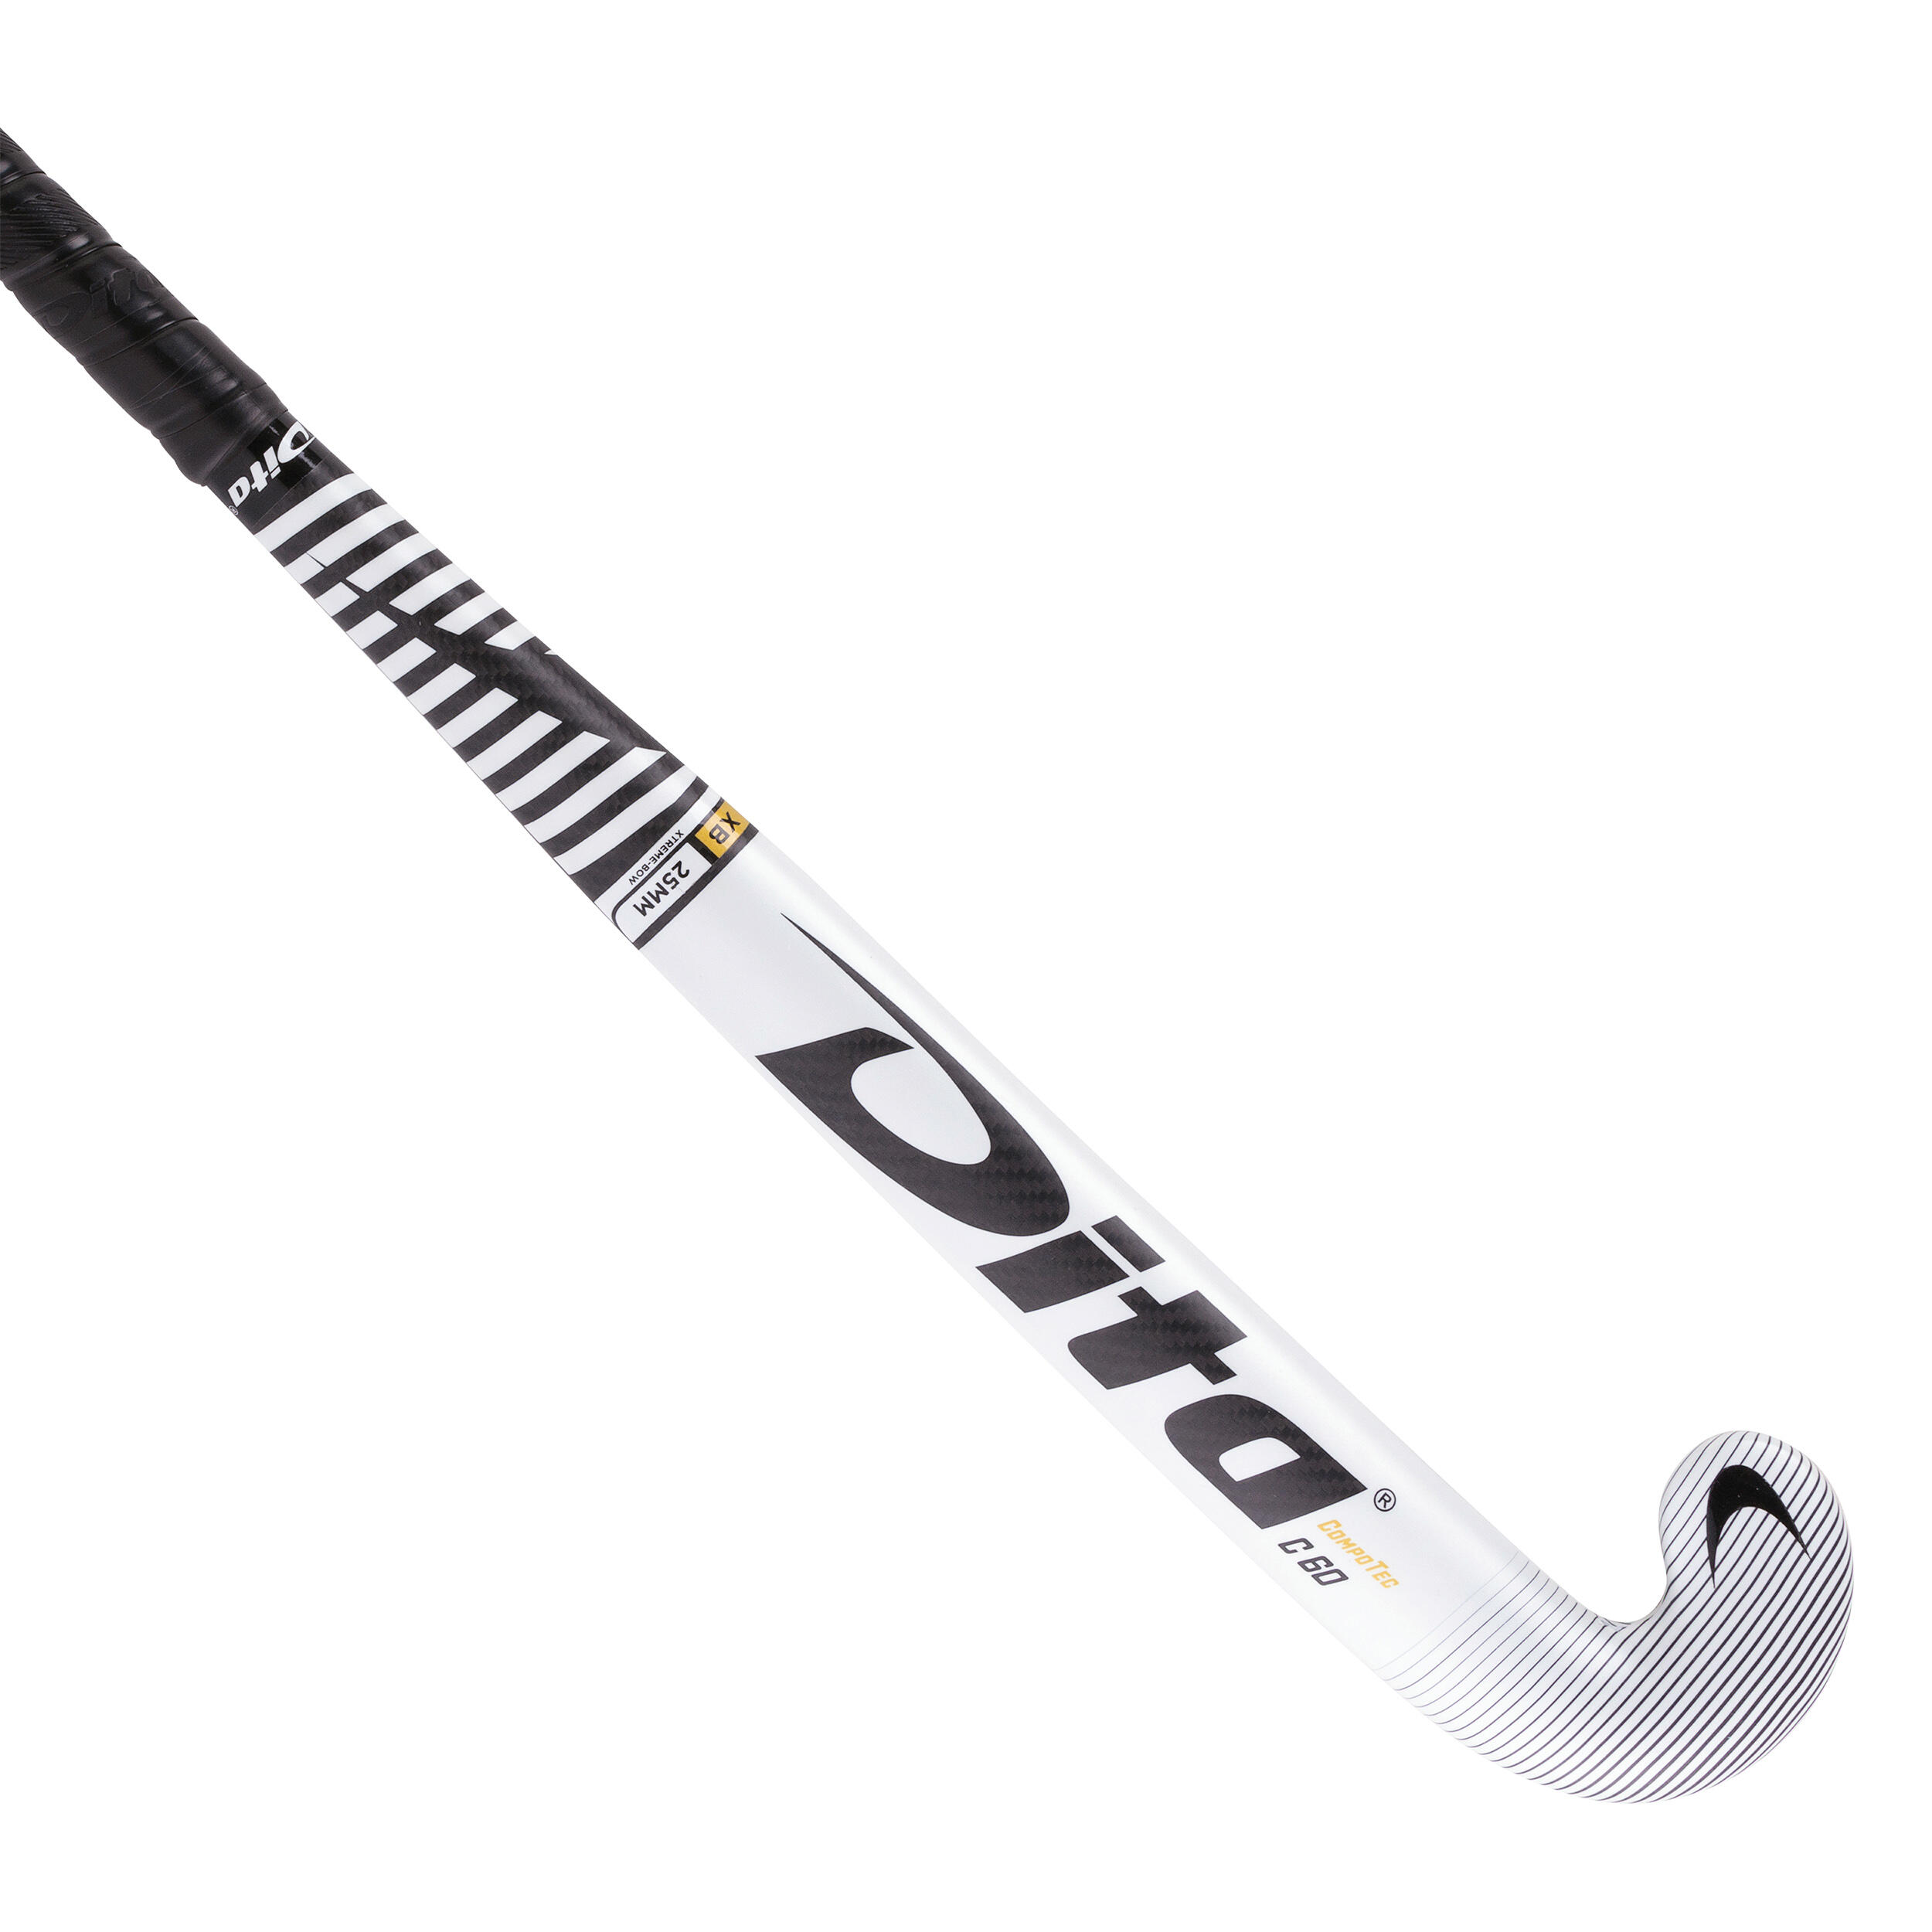 Adult Field Hockey Advanced 60% Carbon X-Low Bow Stick CompotecC60 - White/Black 1/12